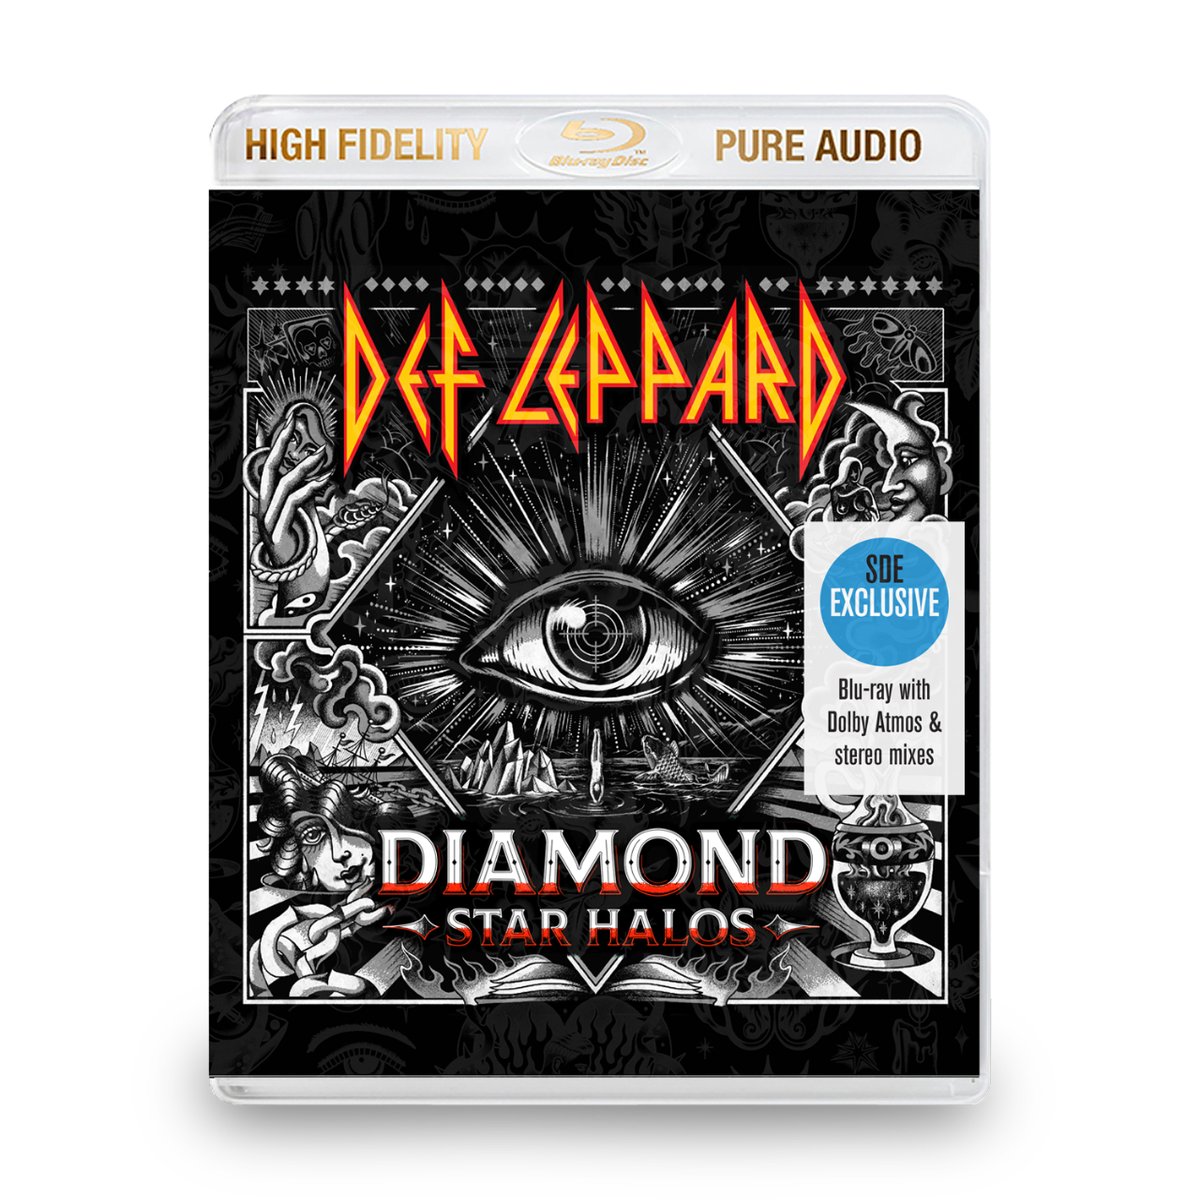 .@DefLeppard's 2022 studio album Diamond Star Halos will be released on blu-ray audio as part of the ongoing @sdedition Surround Series, more info here: bit.ly/40CP0ww